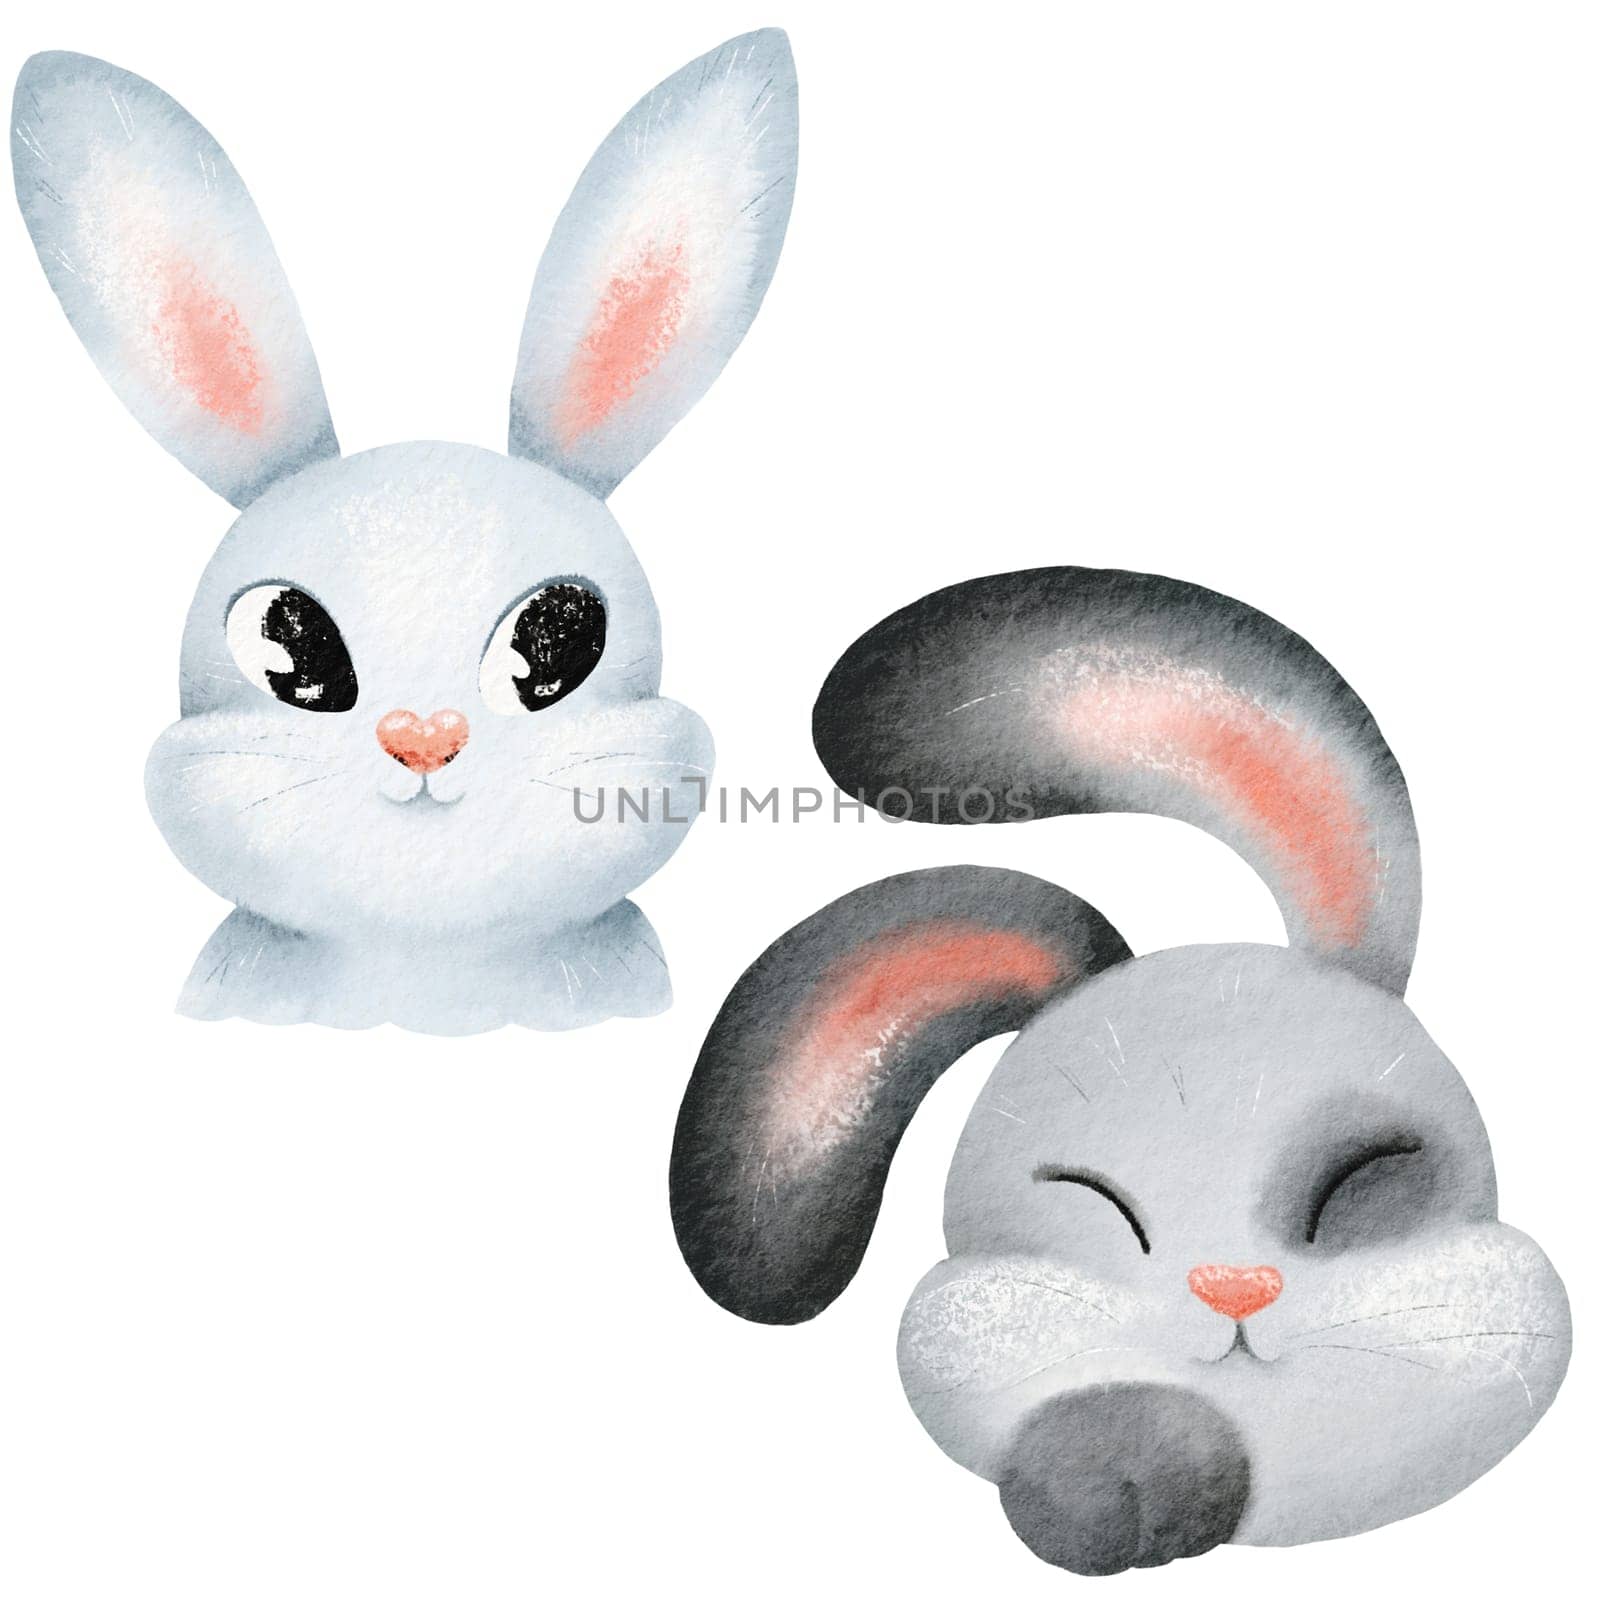 Bunny and rabbit watercolor set. Hand drawn bunnies and rabbits in different color. hare illustration element. Cute characters for easter, Christmas, valentines day, birthday. for postcards, textile.